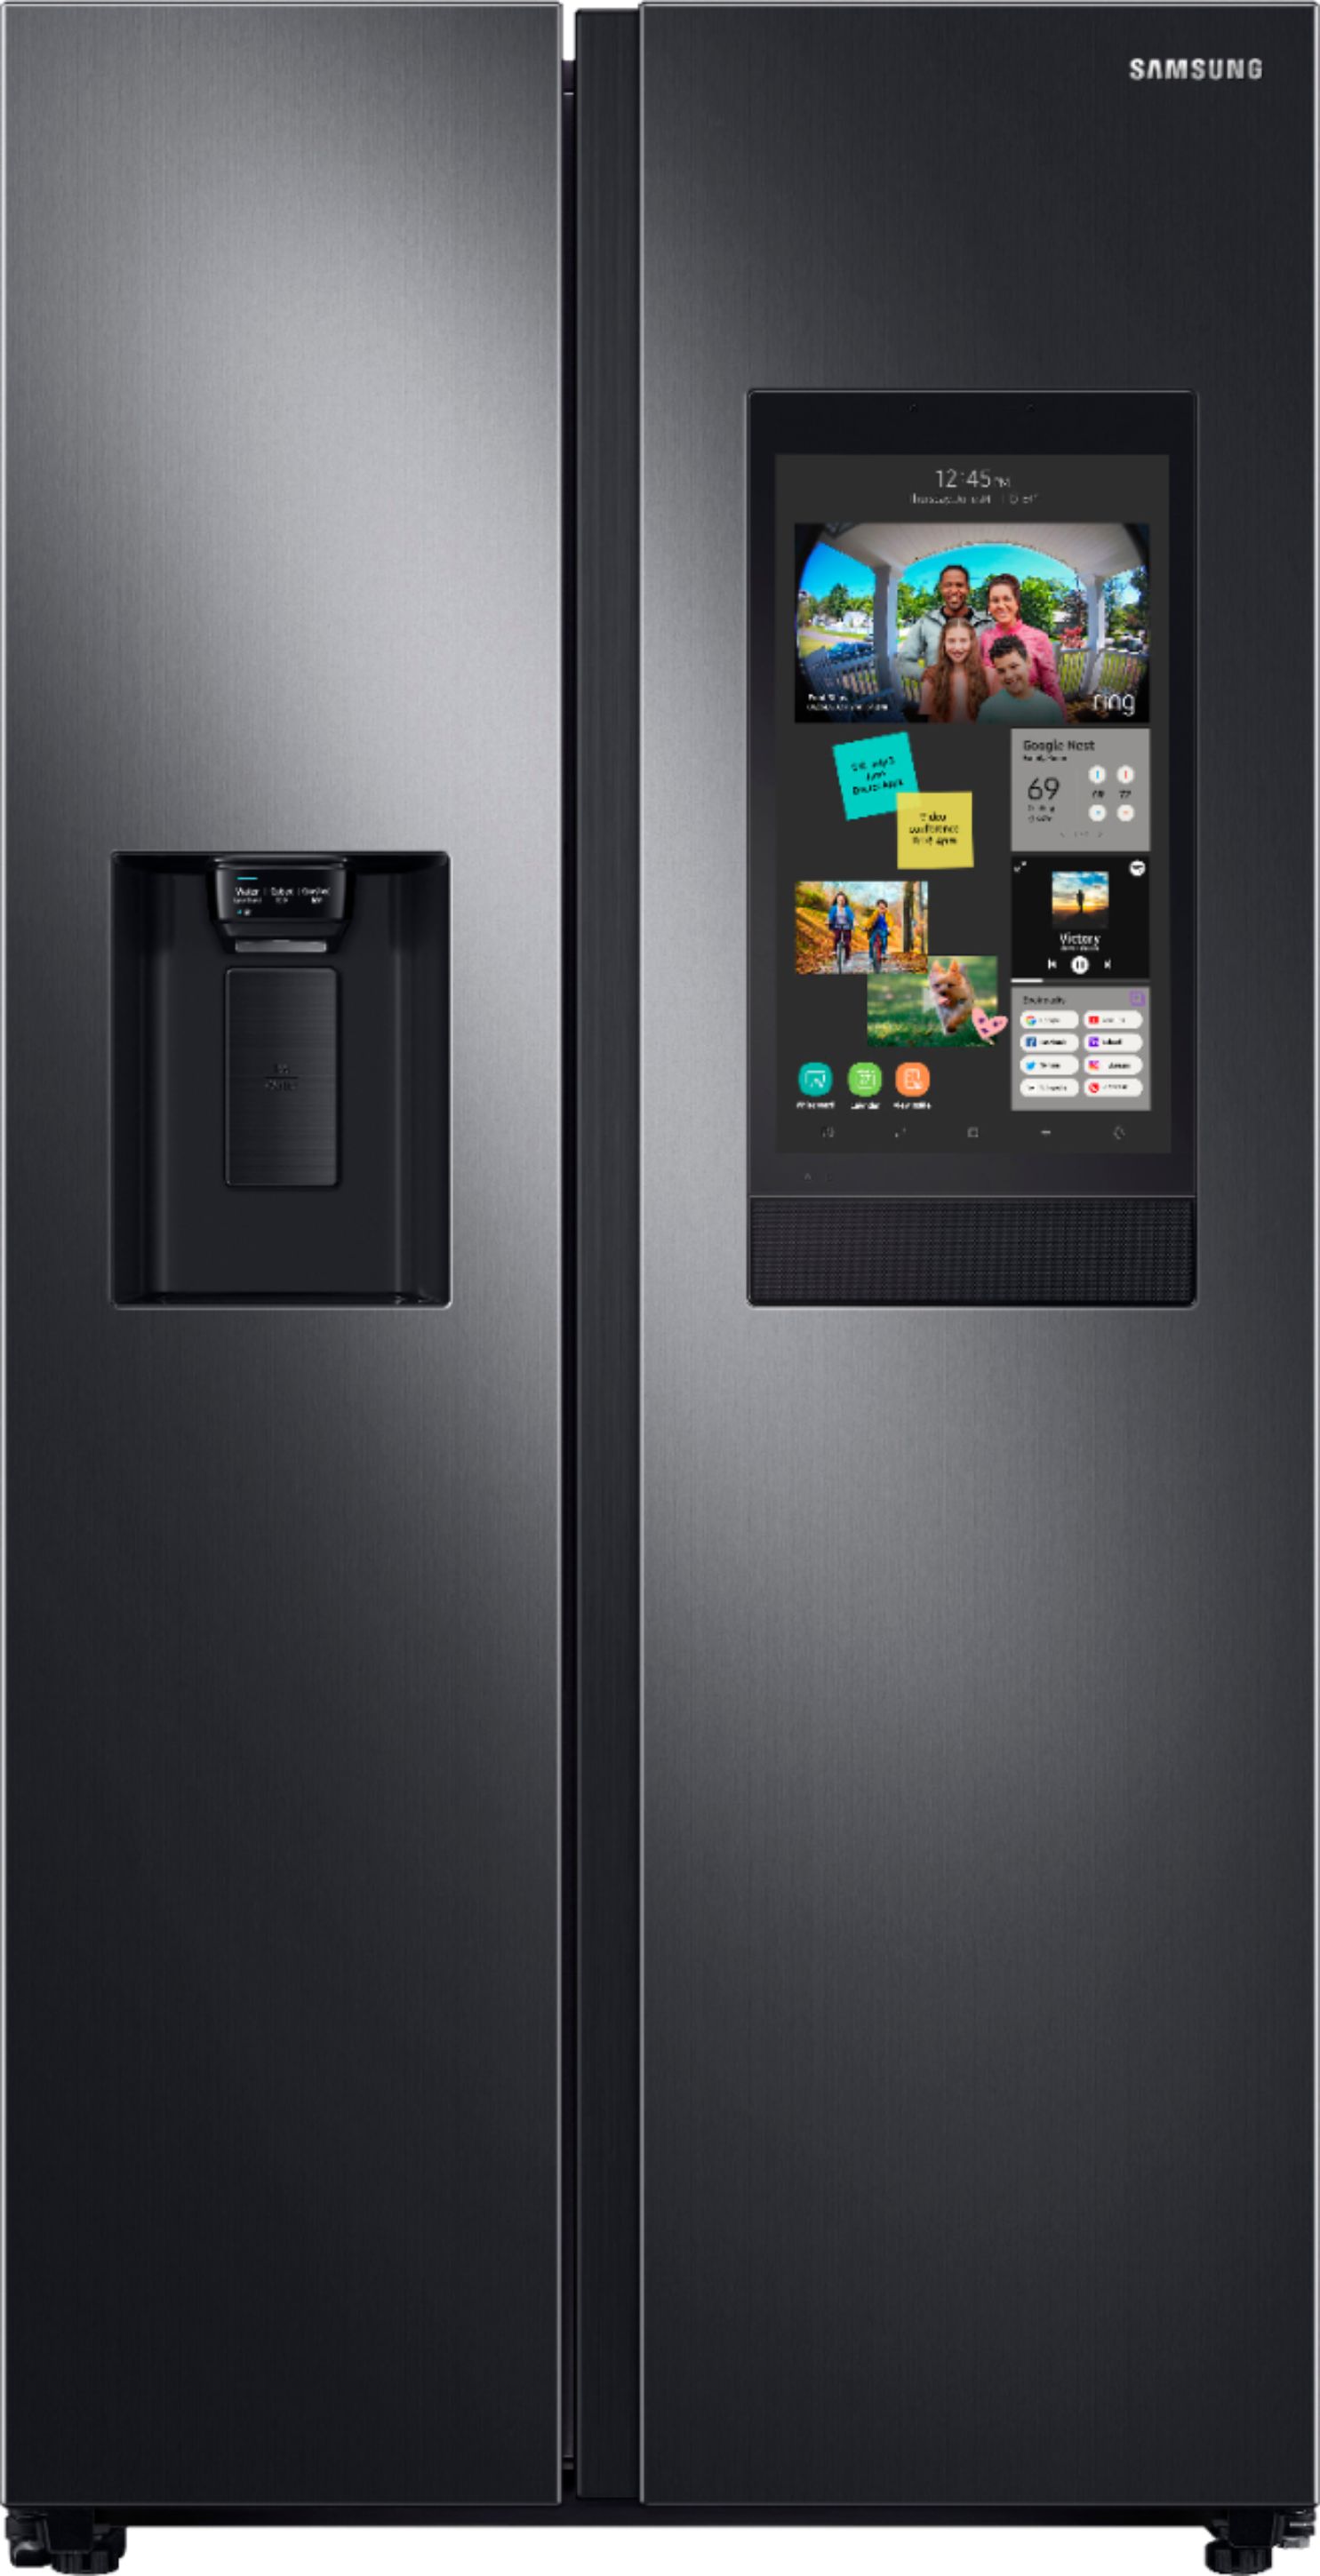 Samsung 26.7 Cu. Ft. Side-by-Side Refrigerator with 21.5" Touch-Screen Family Hub Black stainless steel RS27T5561SG/AA - Best Buy